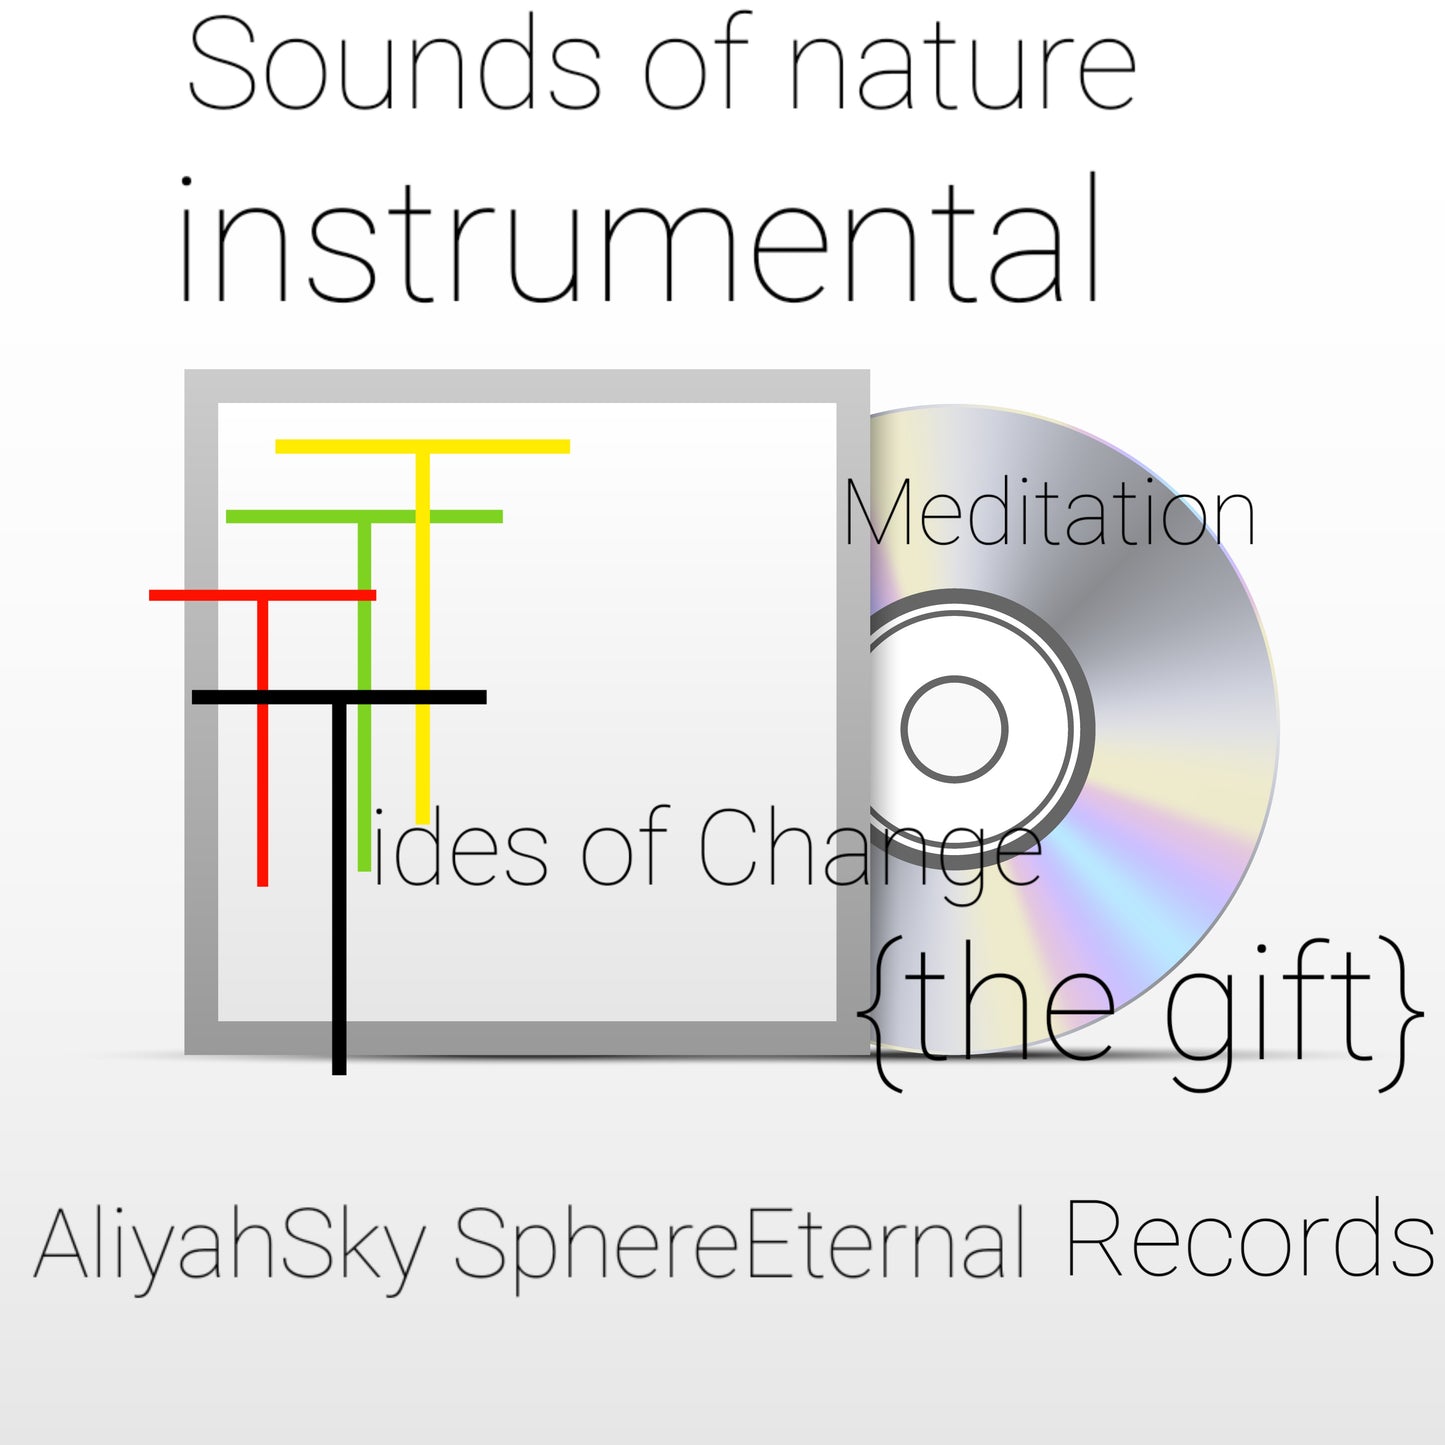 Sounds Of Nature Instrumental Tides Of Change{the gift}